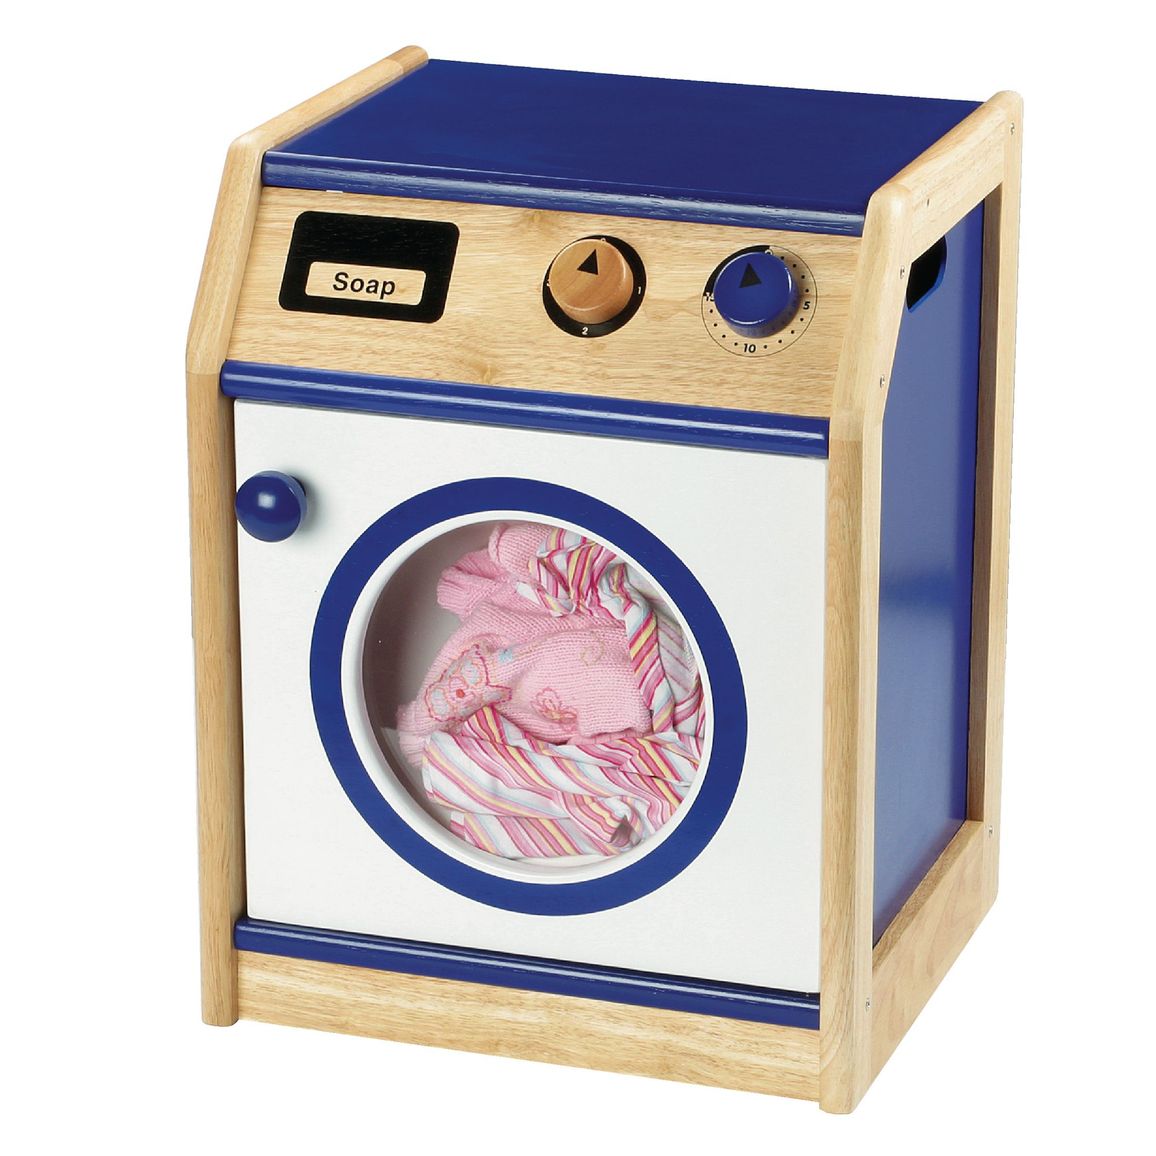 Tidlo Mini Chef Washing Machine, The Tidlo Mini Chef Washing Machine sounds like a wonderful addition to a child's playset, especially for those who enjoy role-playing activities. Let's dive into its features and benefits: Realistic Design: The easy-open large front door and clicking dials give the toy a realistic feel. This could be a good way to introduce children to household chores in an entertaining and educational manner. Educational Value: Beyond just being a fun toy, it offers a valuable opportunity